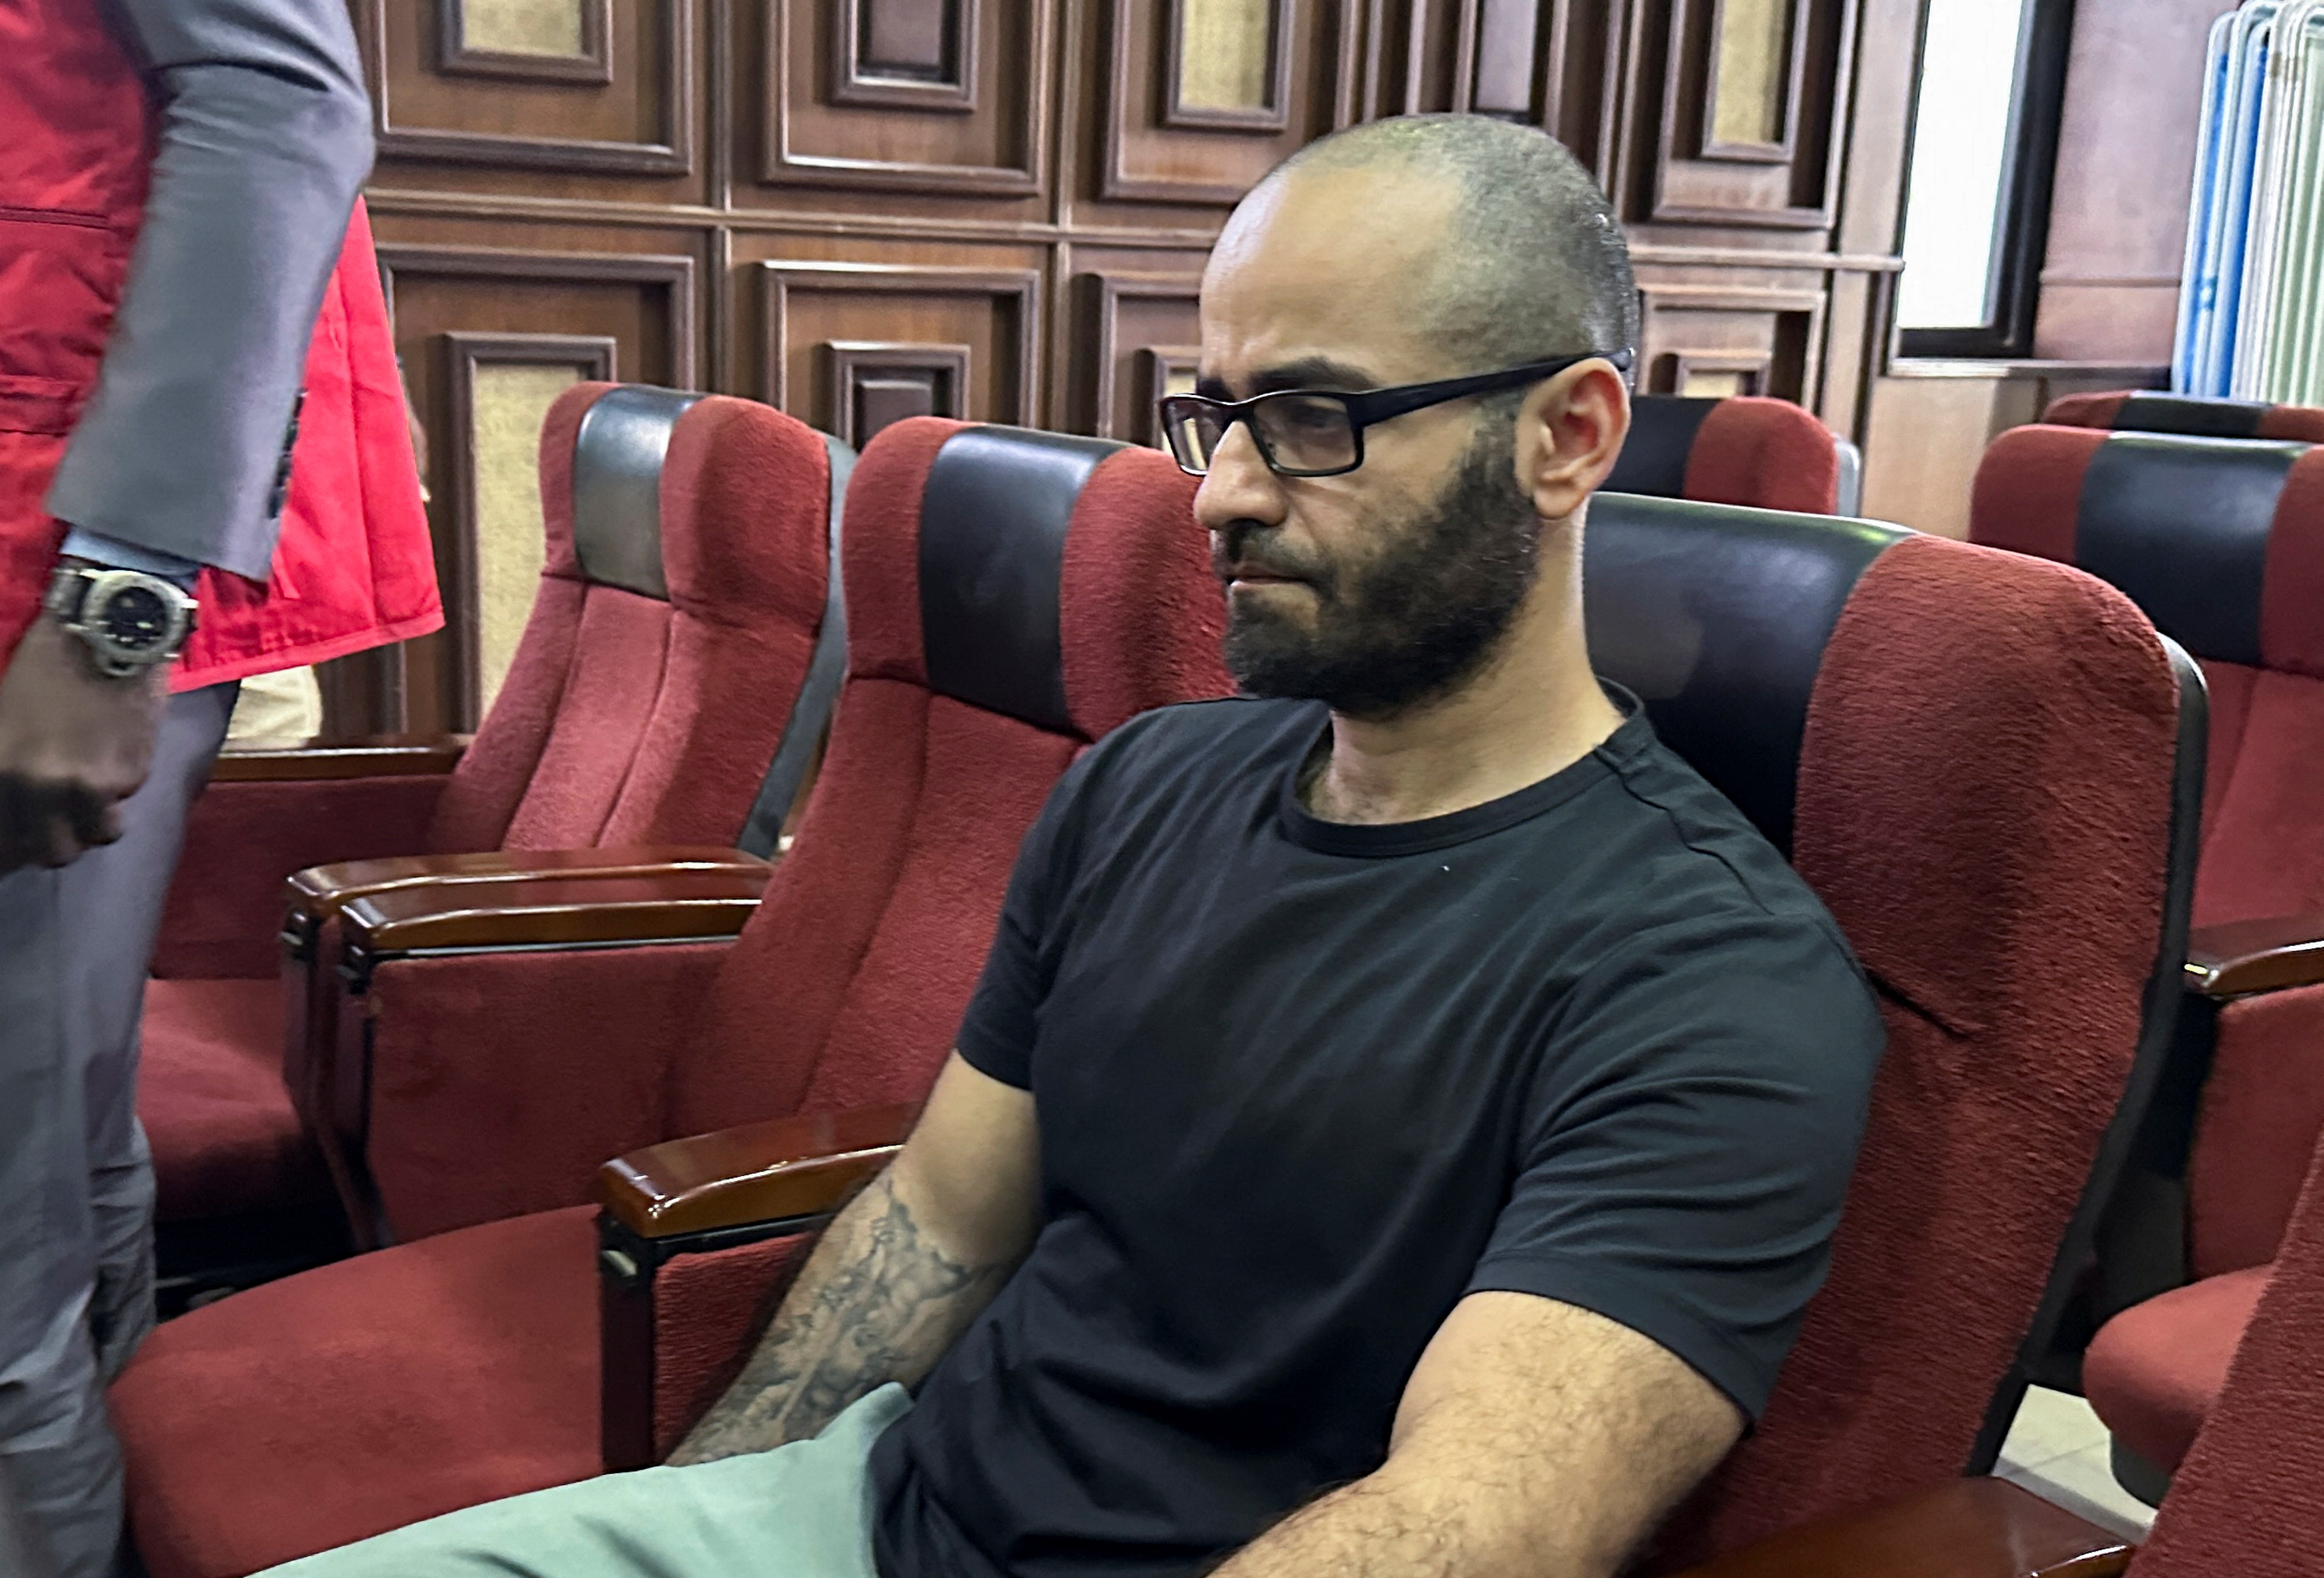 Tigran Gambaryan, an executive of Binance, face prosecution for tax evasion and money laundering at the federal high court in Abuja